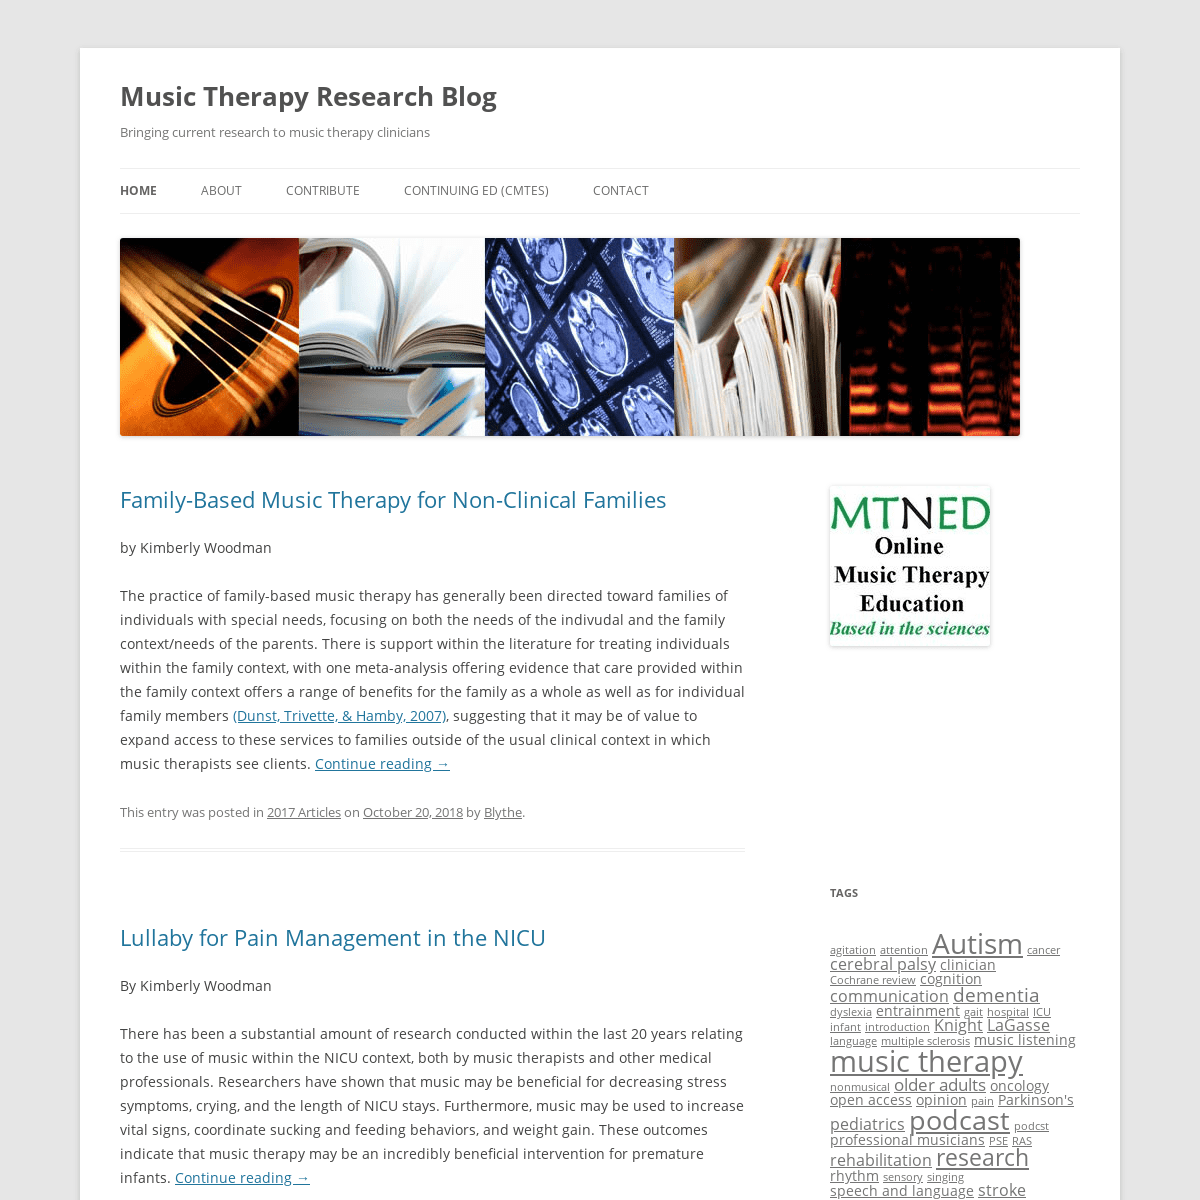 A complete backup of musictherapyresearchblog.com